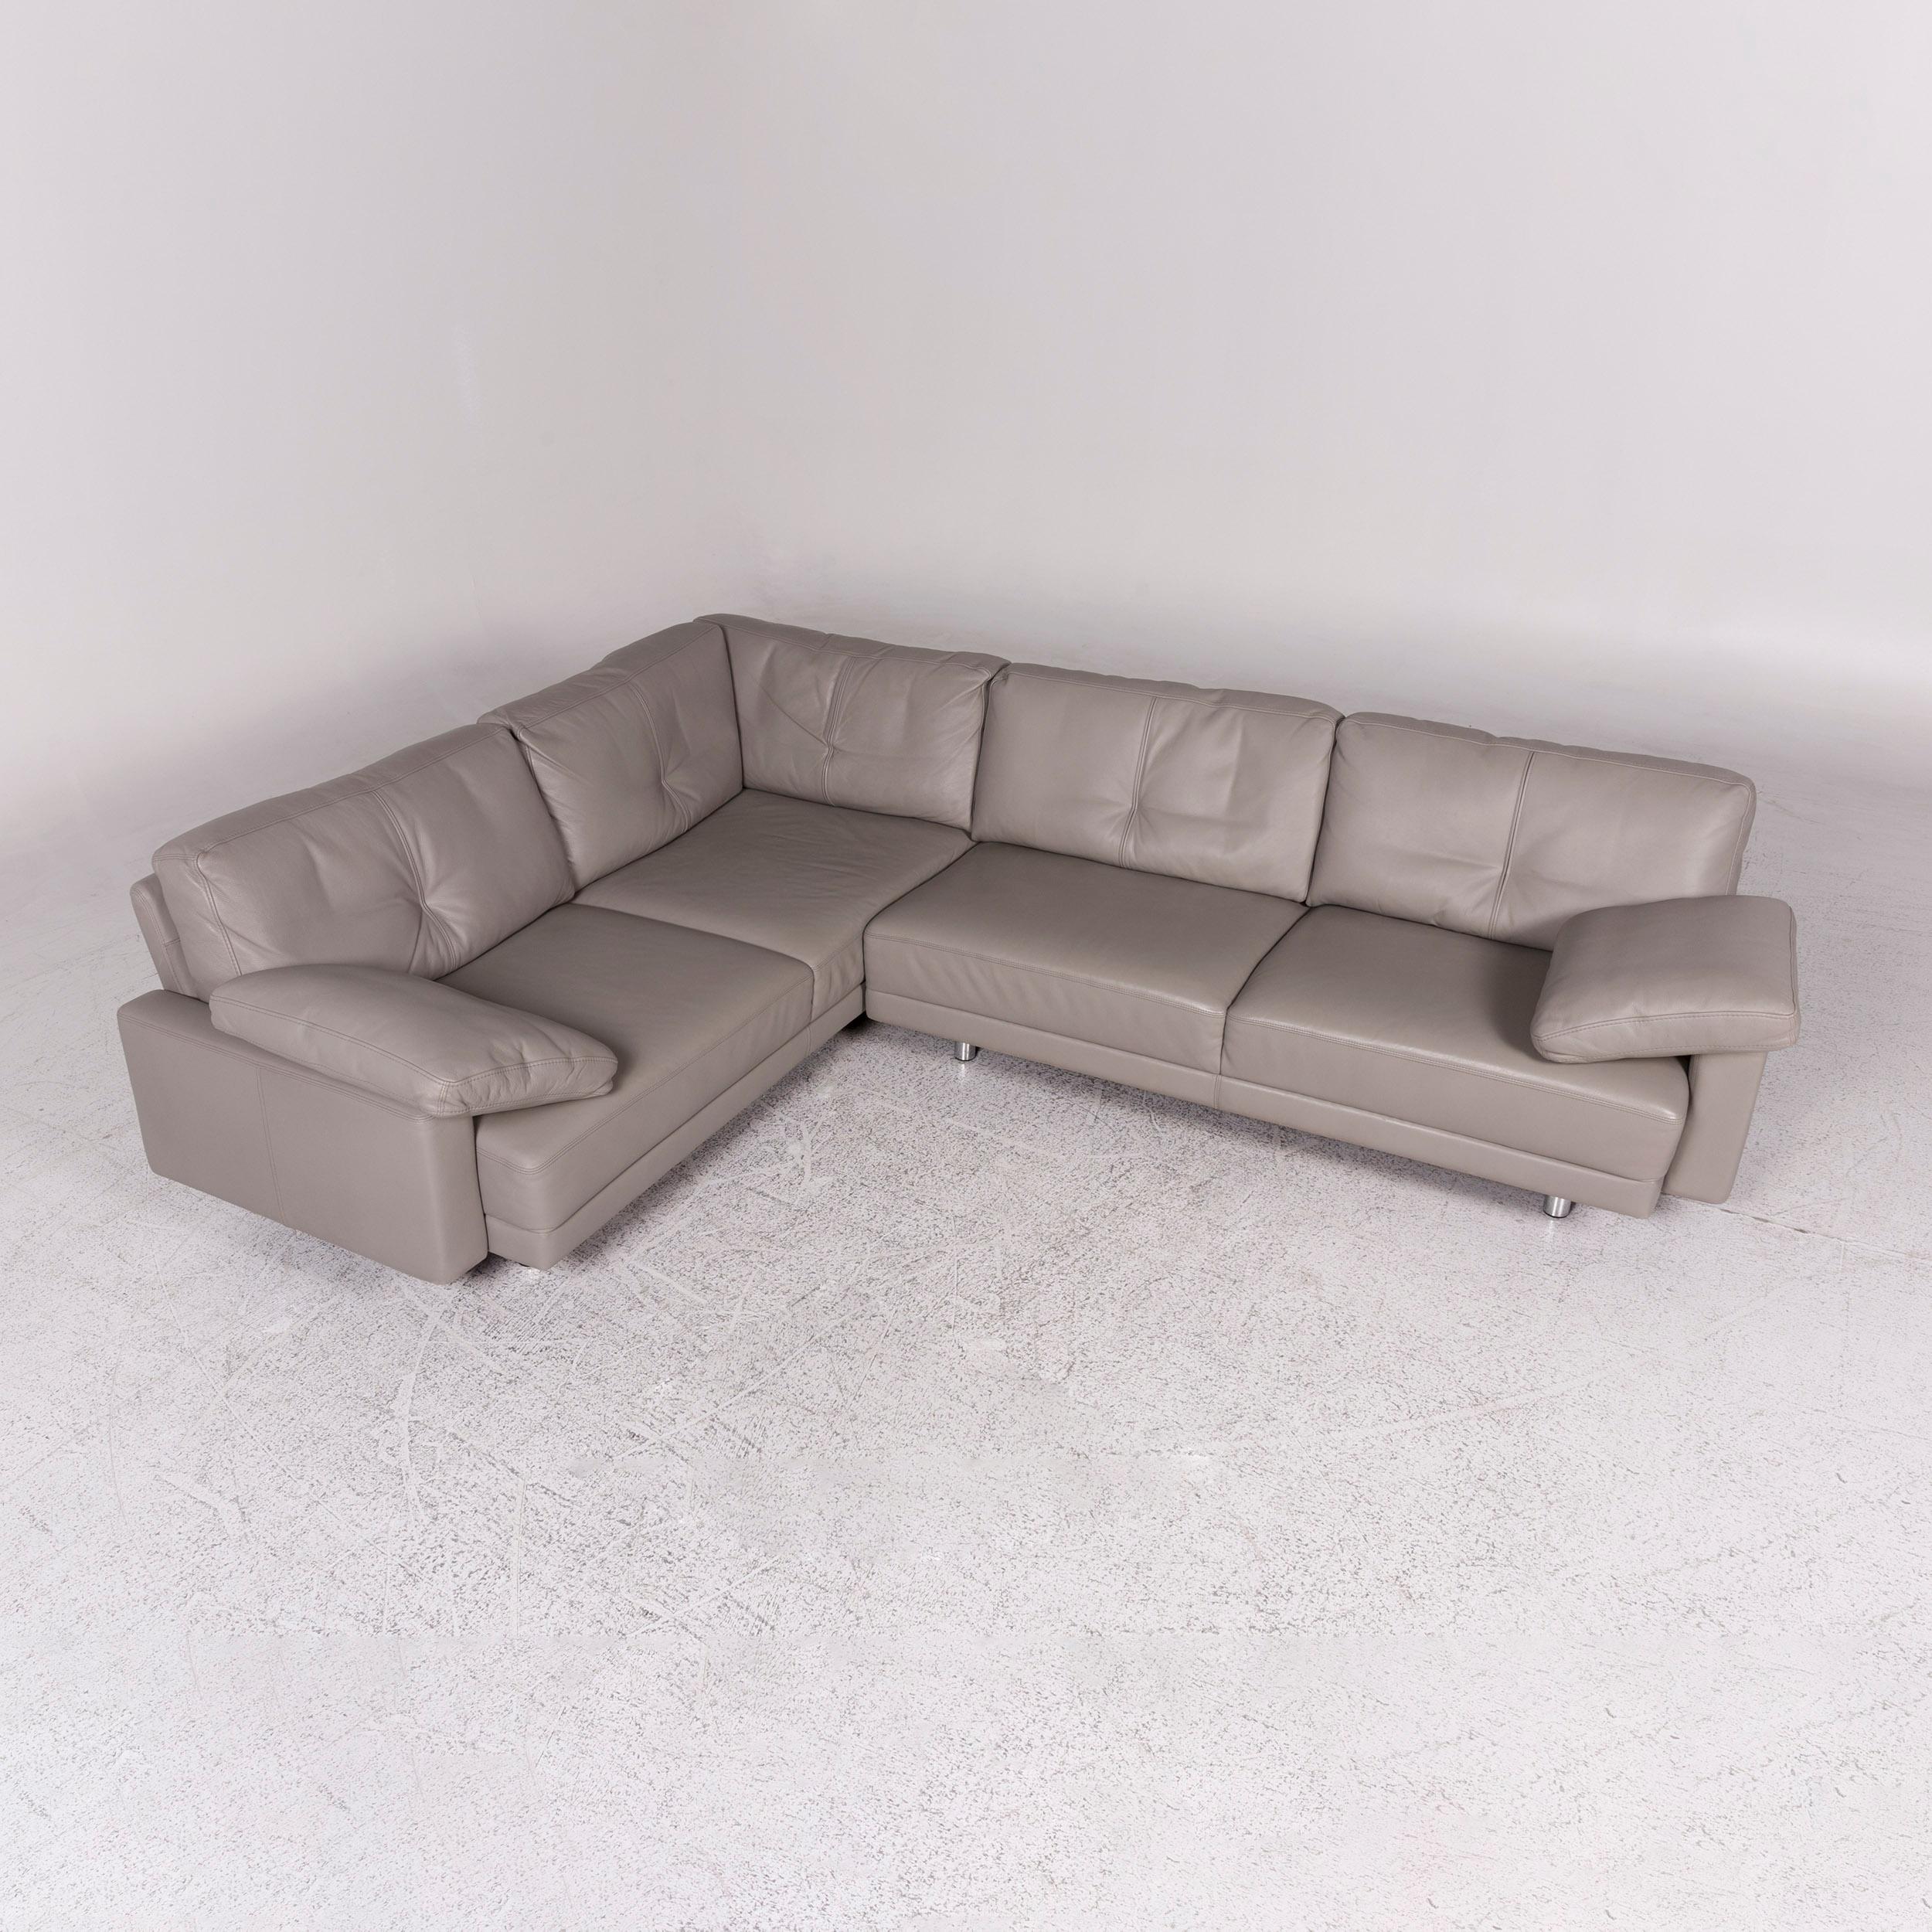 We bring to you a Brühl & Sippold leather corner sofa gray sofa couch.
 
 Product measurements in centimeters:
 
 depth 213
 width 213
 height 82
 seat-height 43
 rest-height 71
 seat-depth 50
 seat-width 160
 back-height 40.
   